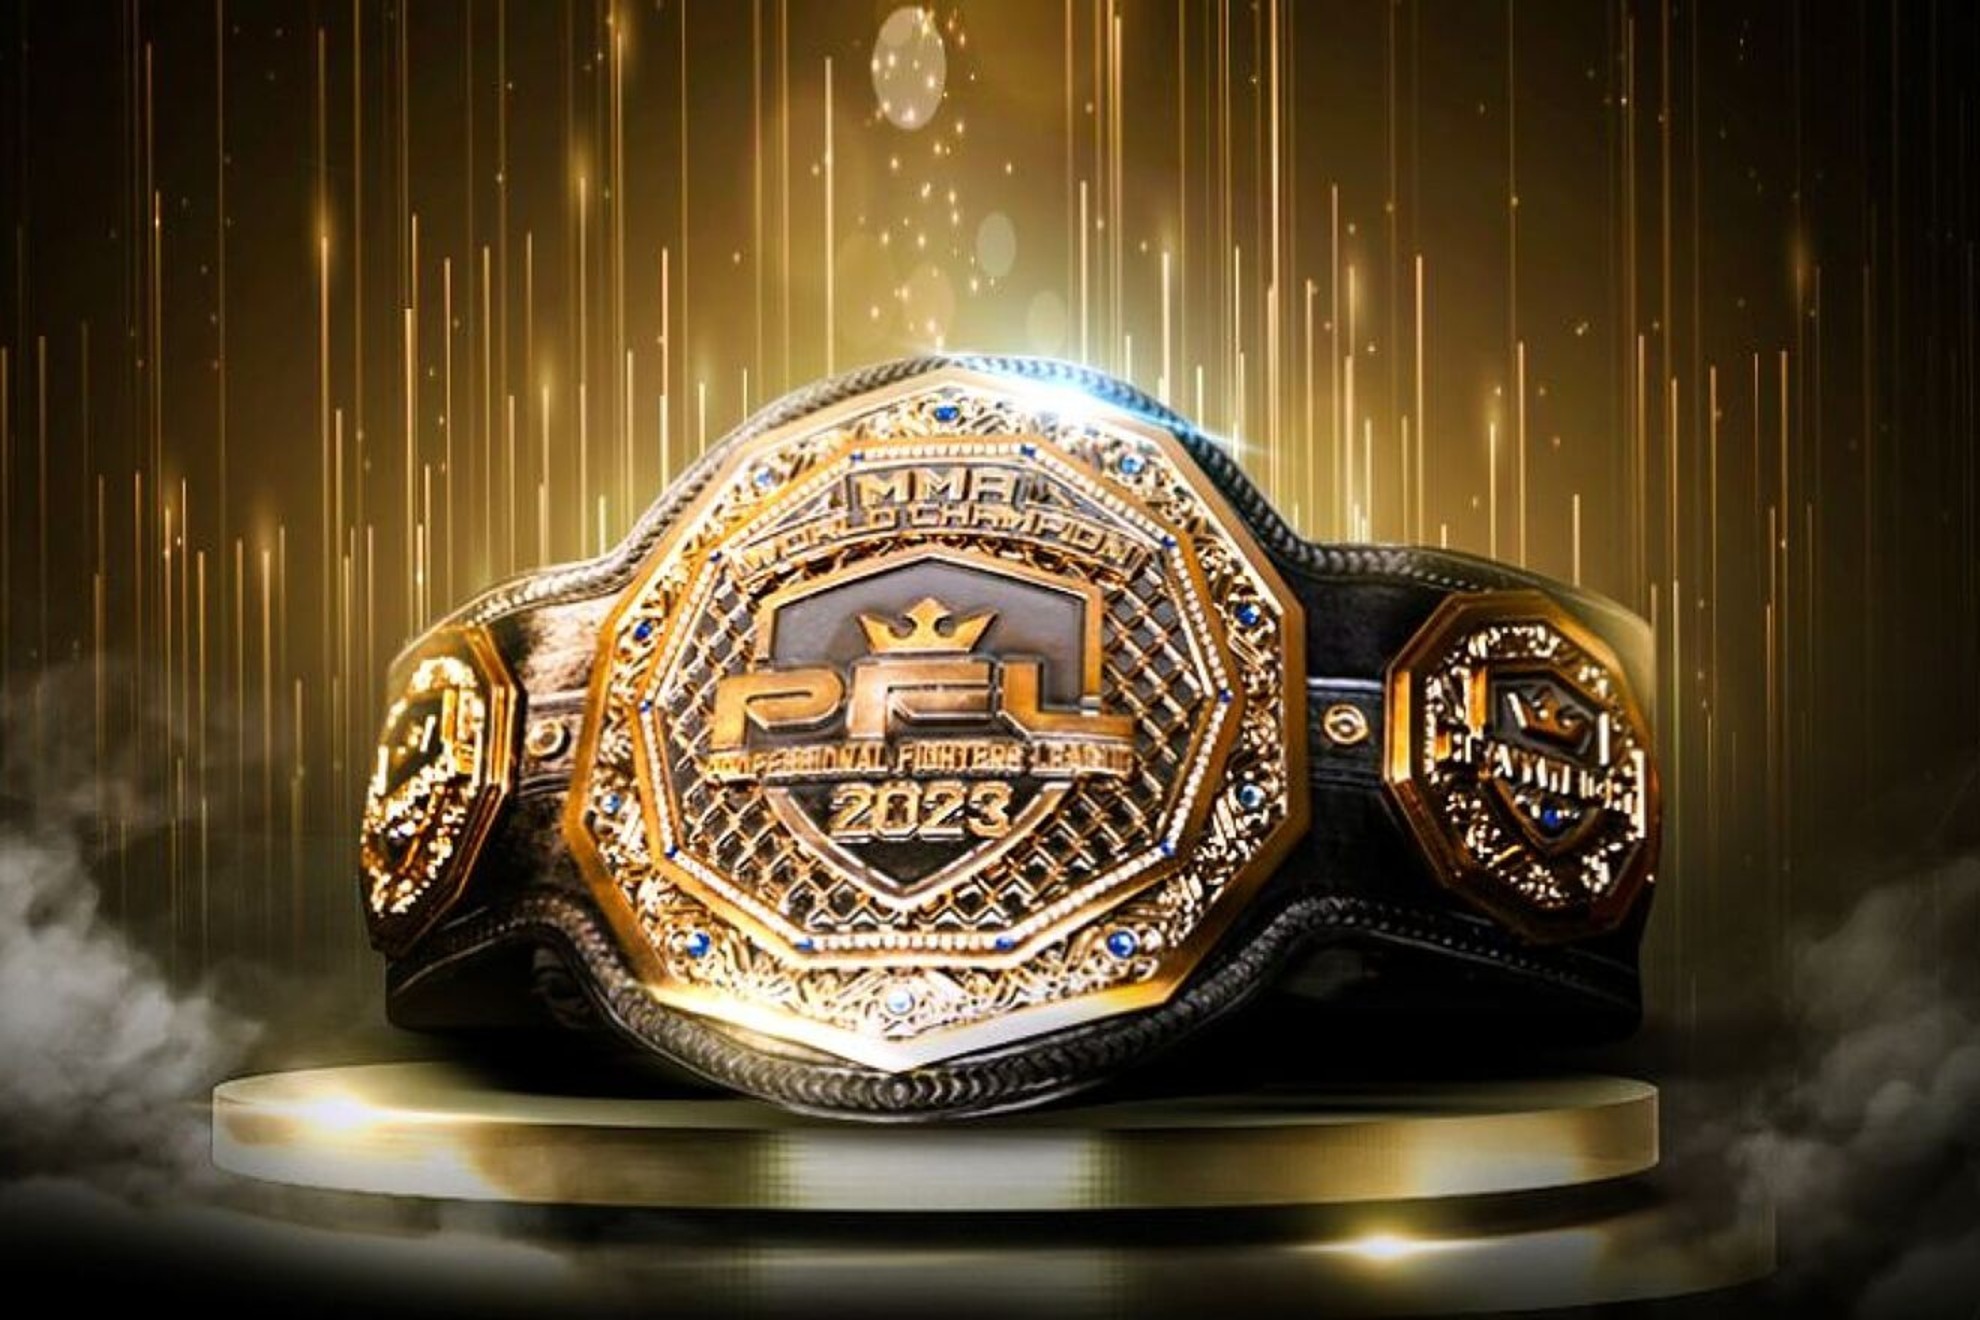 PFL World Championship 2023 Prize Money: How much will the champions win?